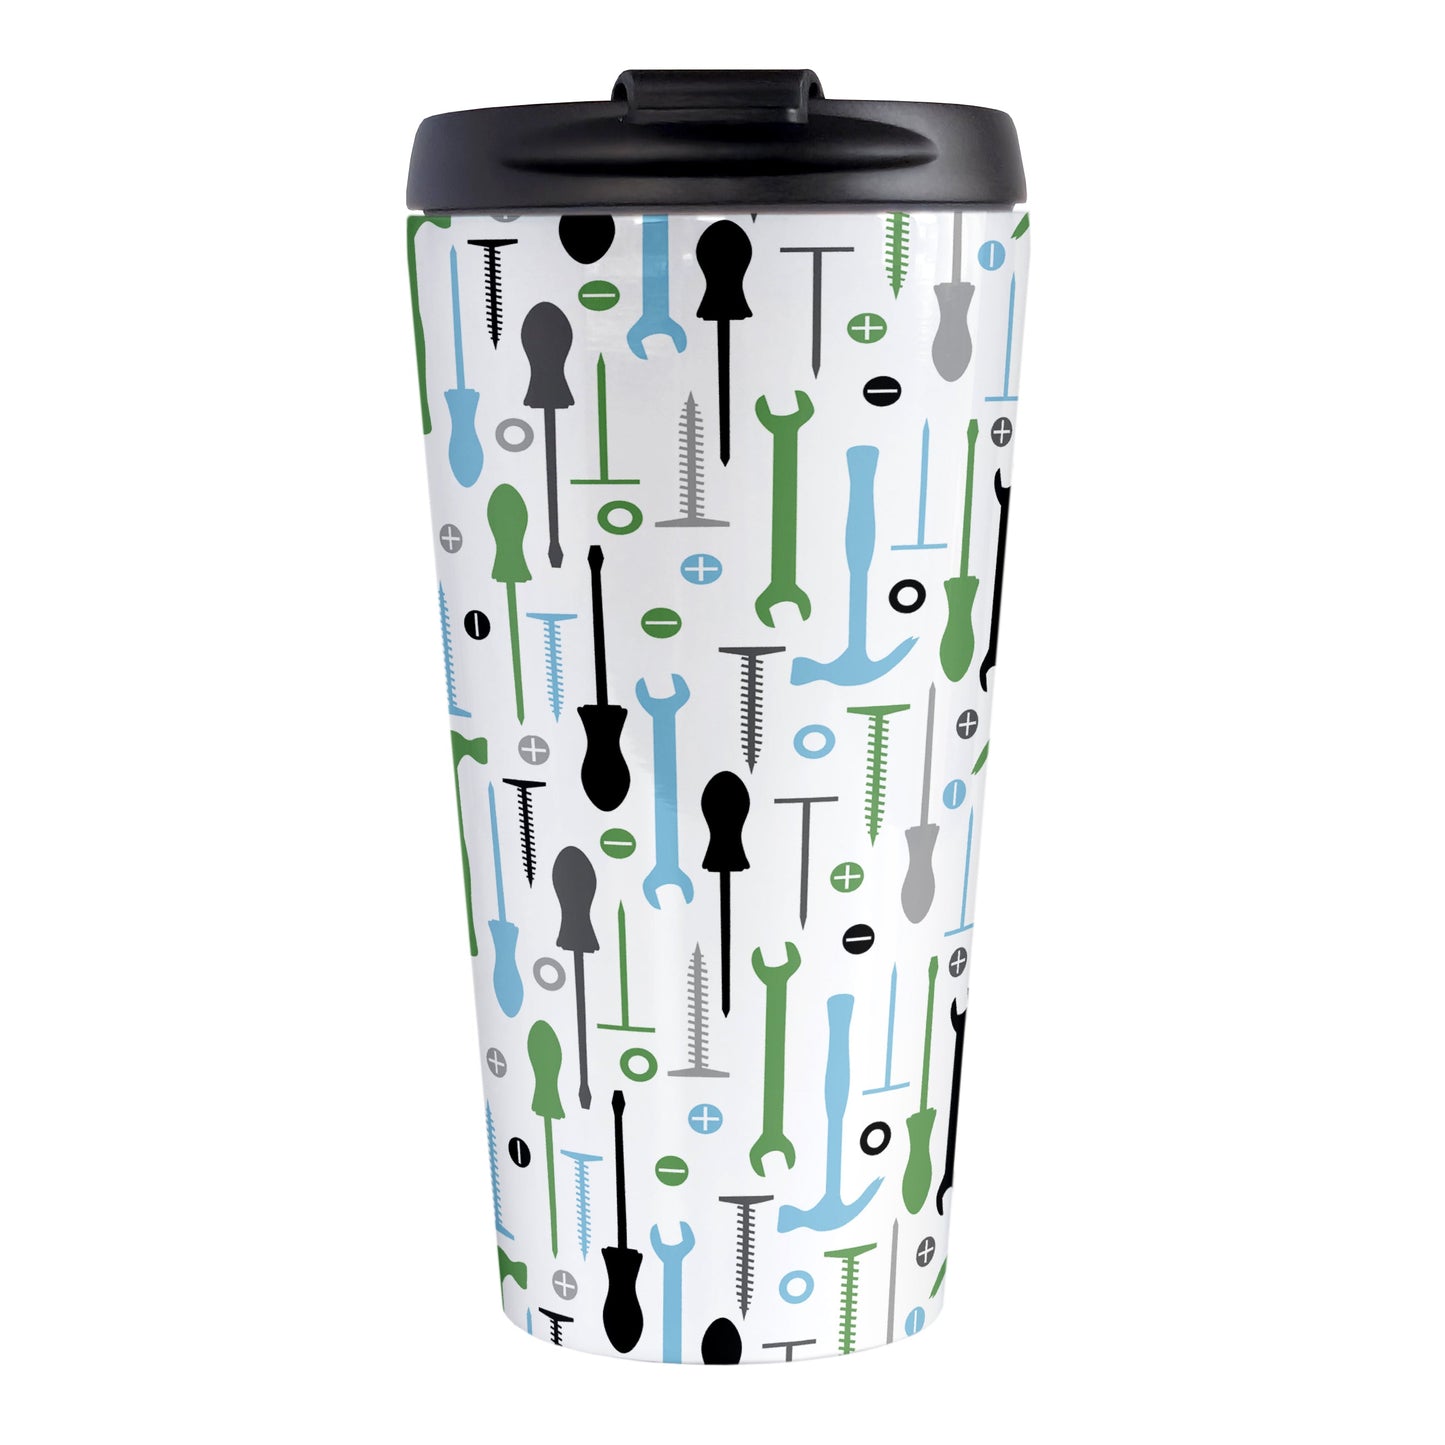 Green Blue Tools Pattern Travel Mug (15oz) at Amy's Coffee Mugs. A stainless steel insulated travel mug with a modern style pattern of tools in green, blue, black, and gray over white that wraps around the mug. Perfect for any handyman or contractor. 